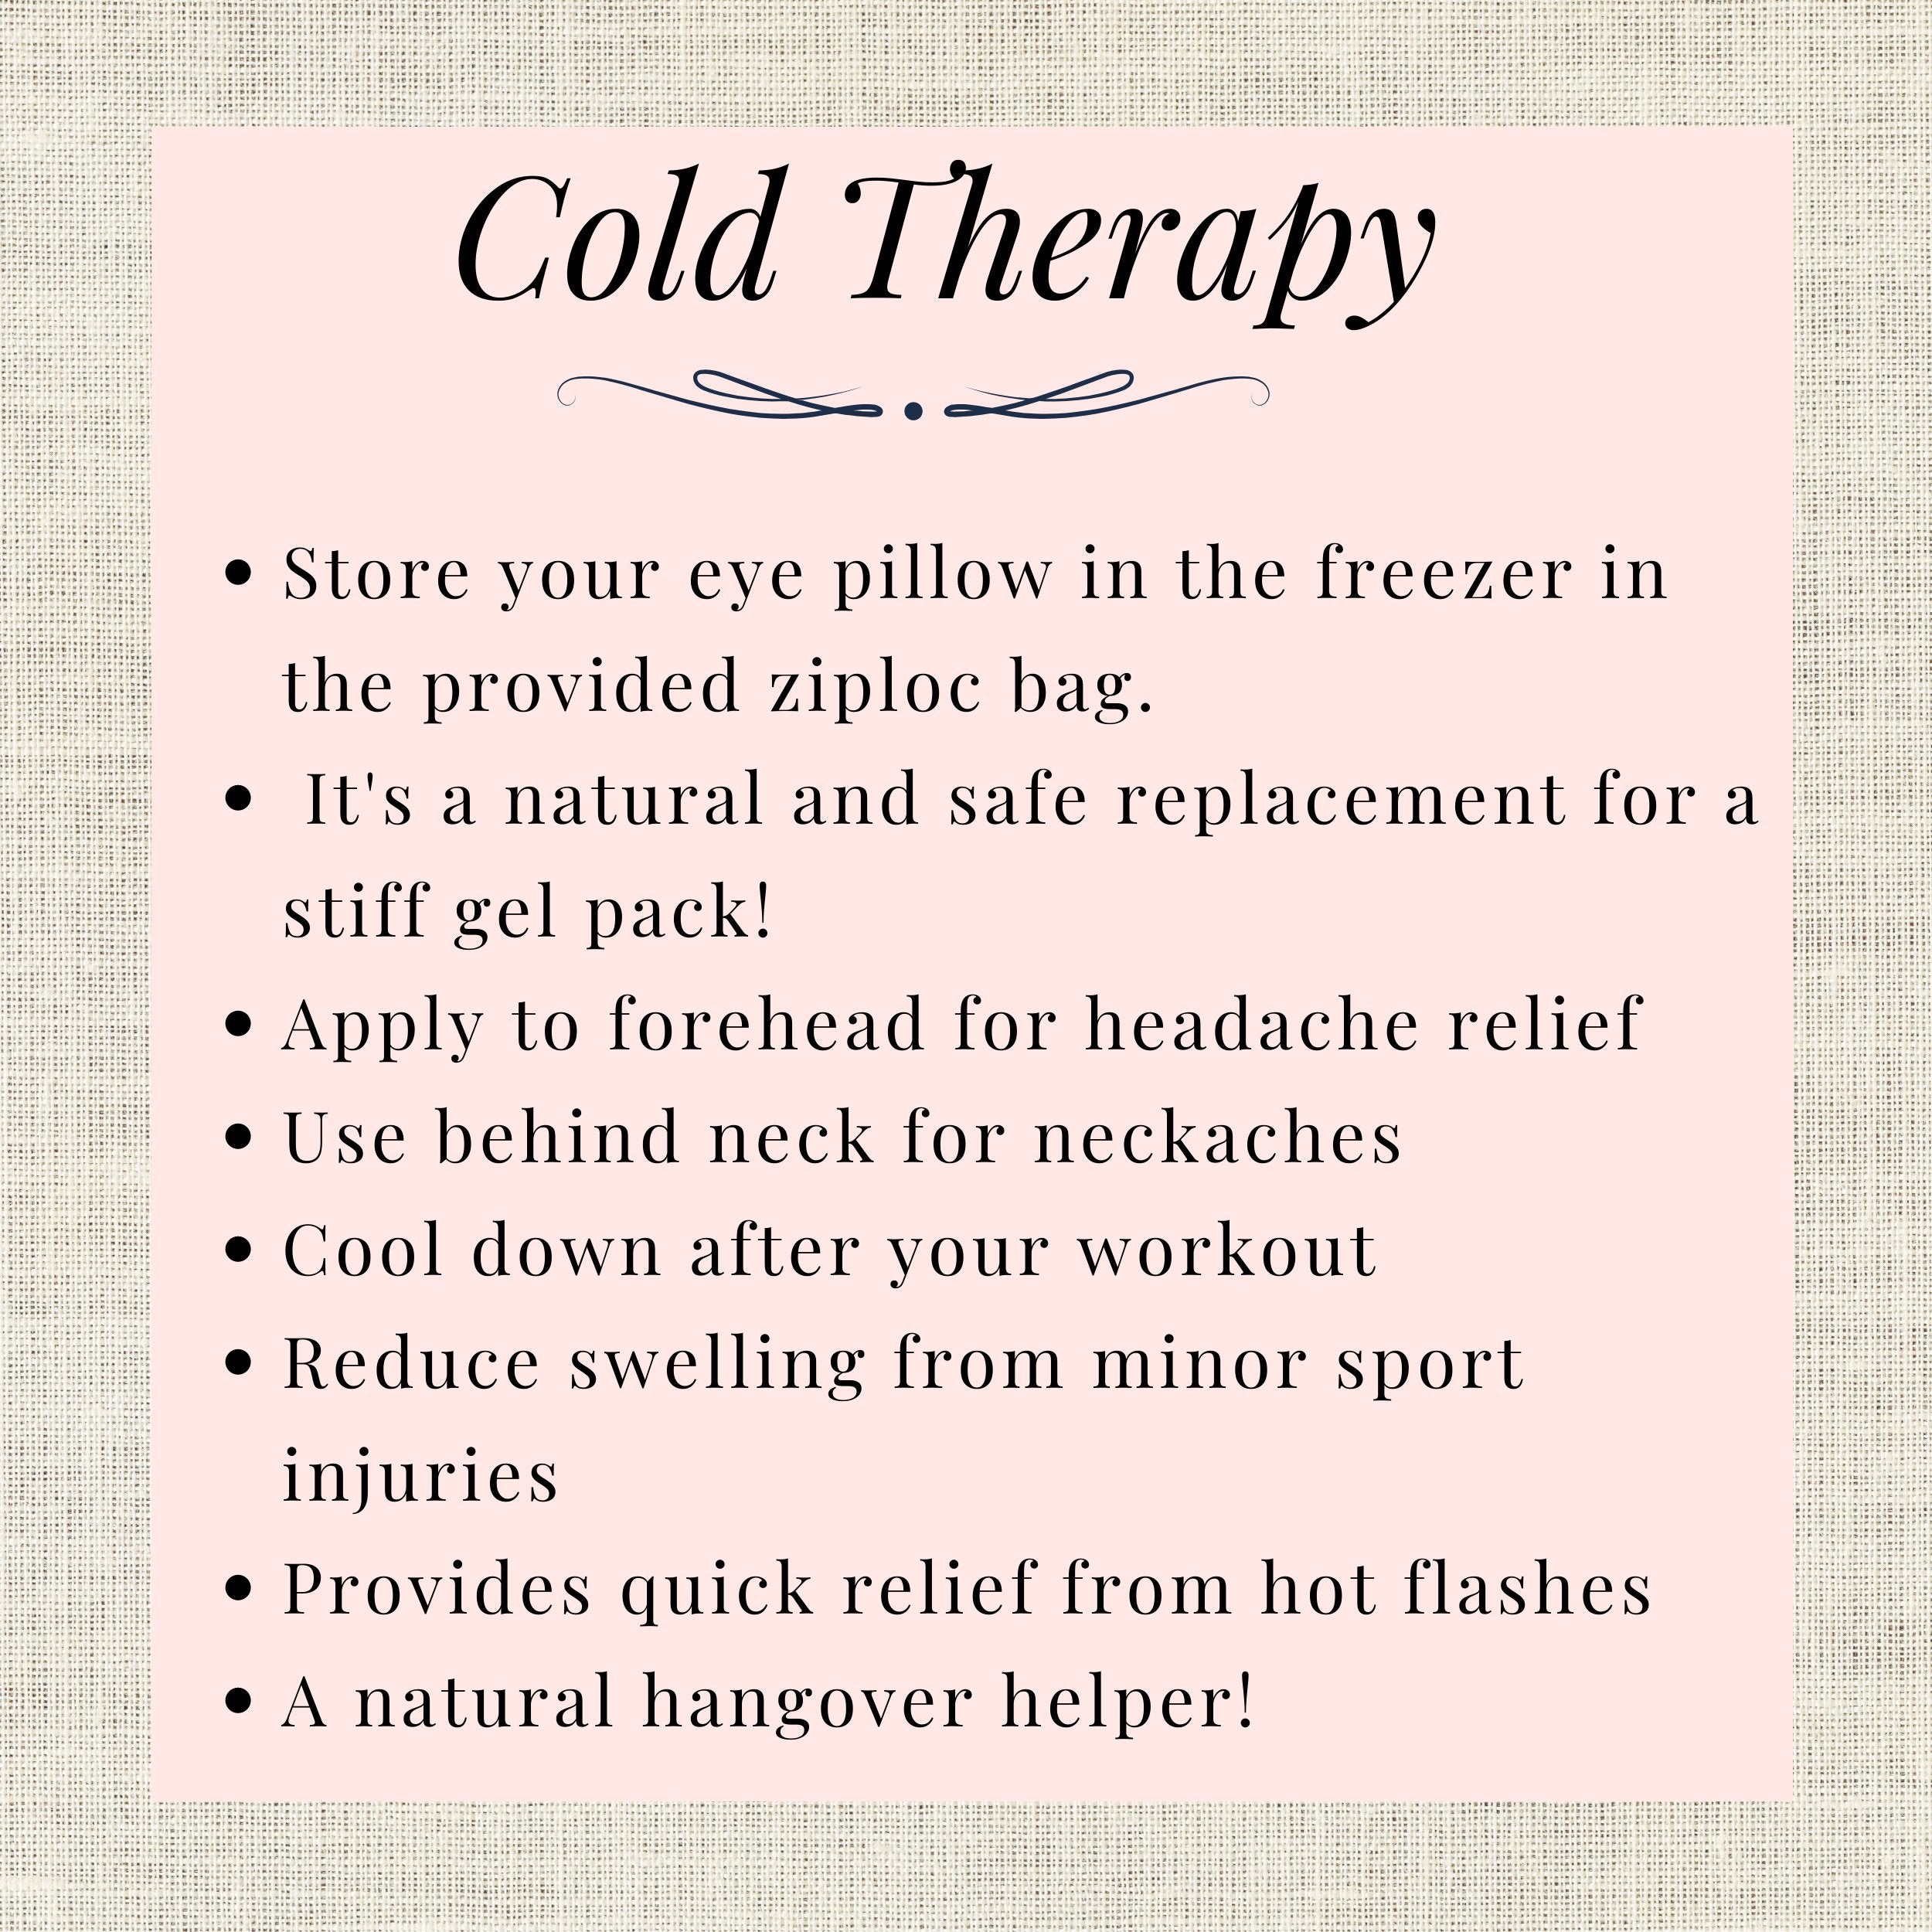 Detailed instructions for cold therapy